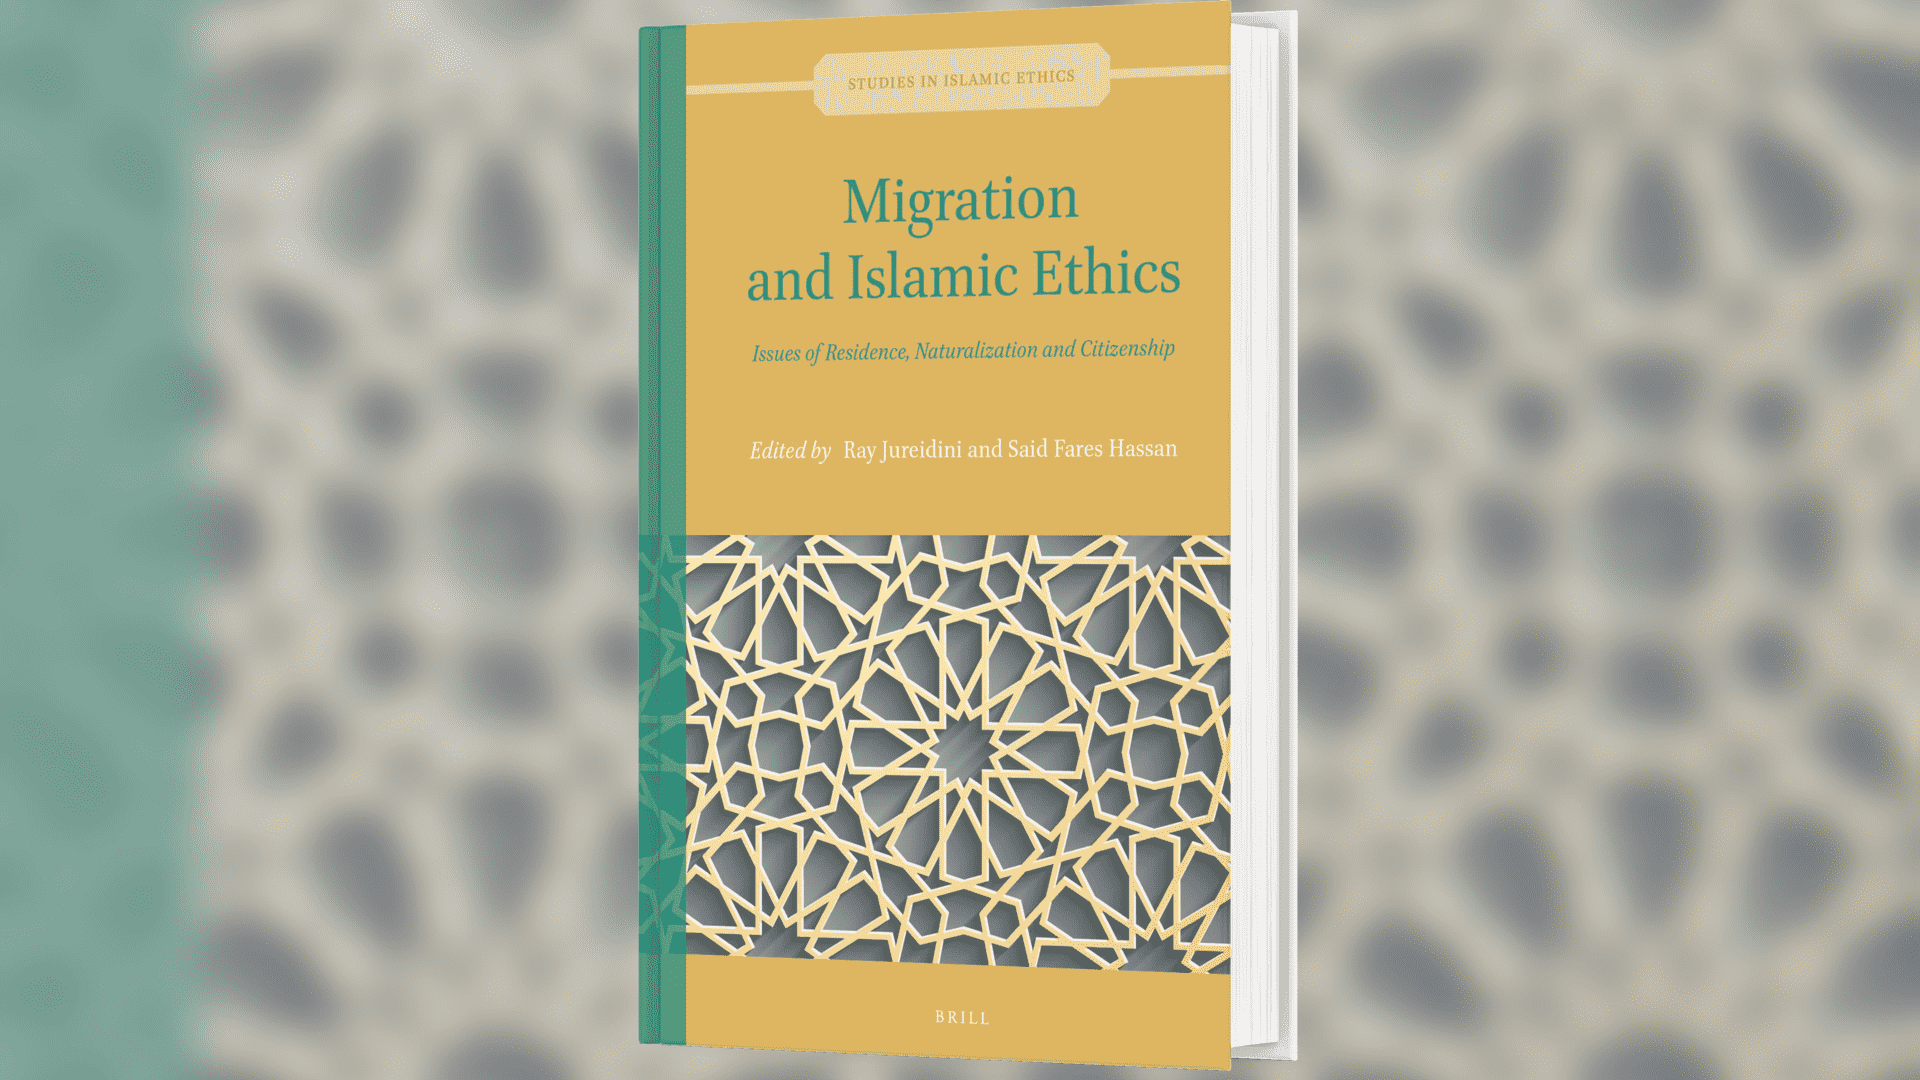 Volume 2 of Studies in Islamic Ethics "Migration and Islamic Ethics: Issues of Residence, Naturalization and Citizenship"